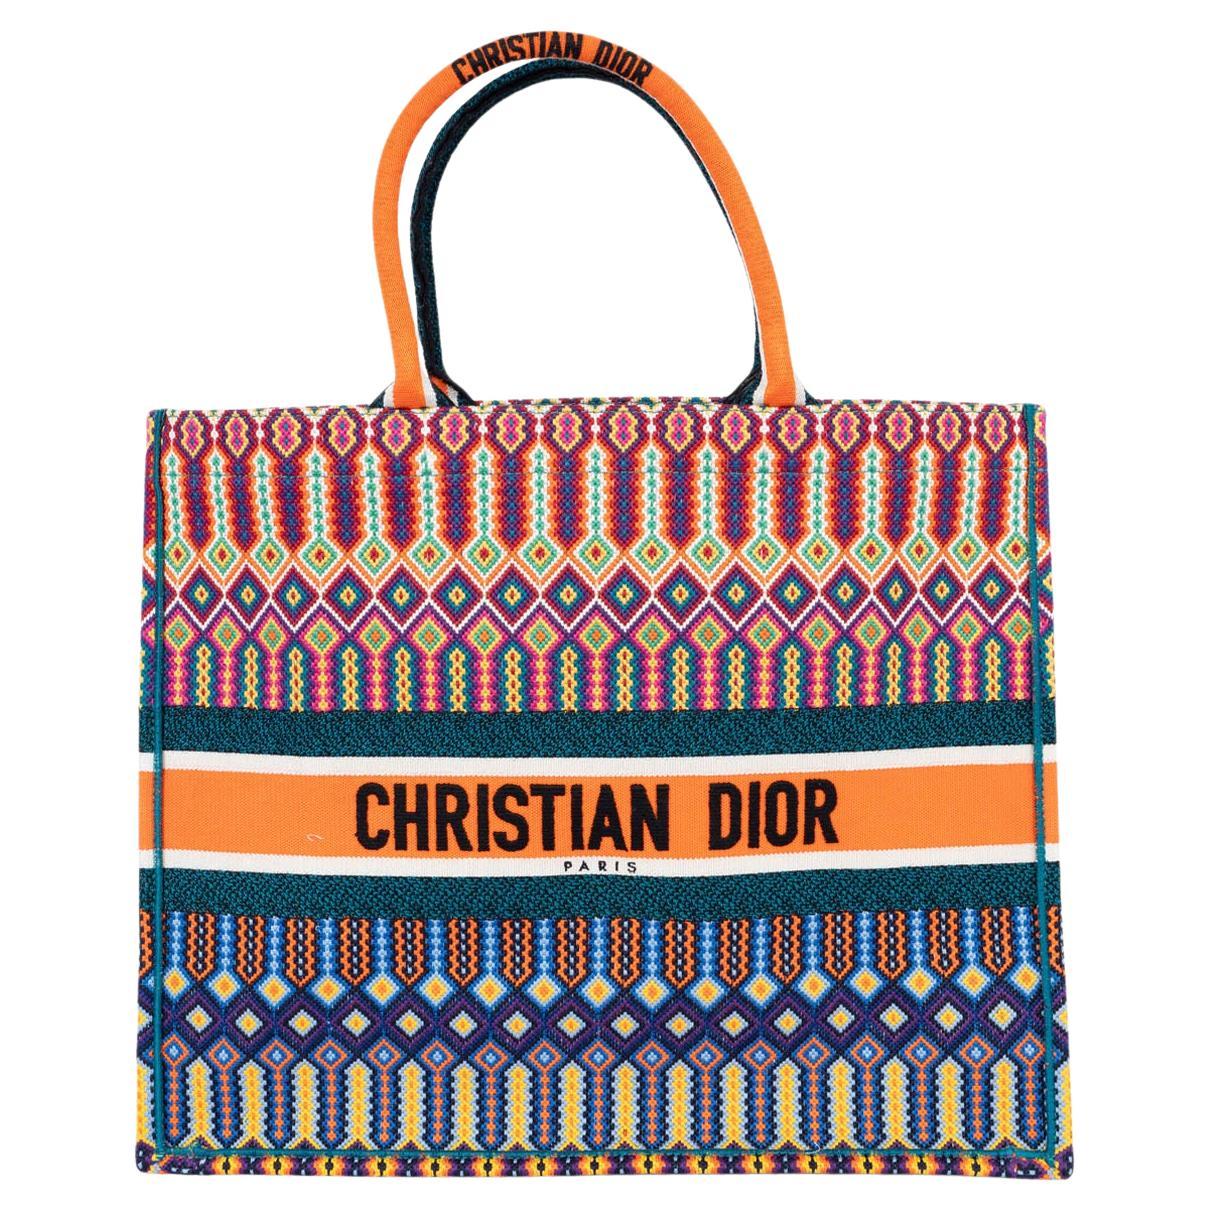 CHRISTIAN DIOR multicolor Mexican canvas LARGE BOOK TOTE Bag